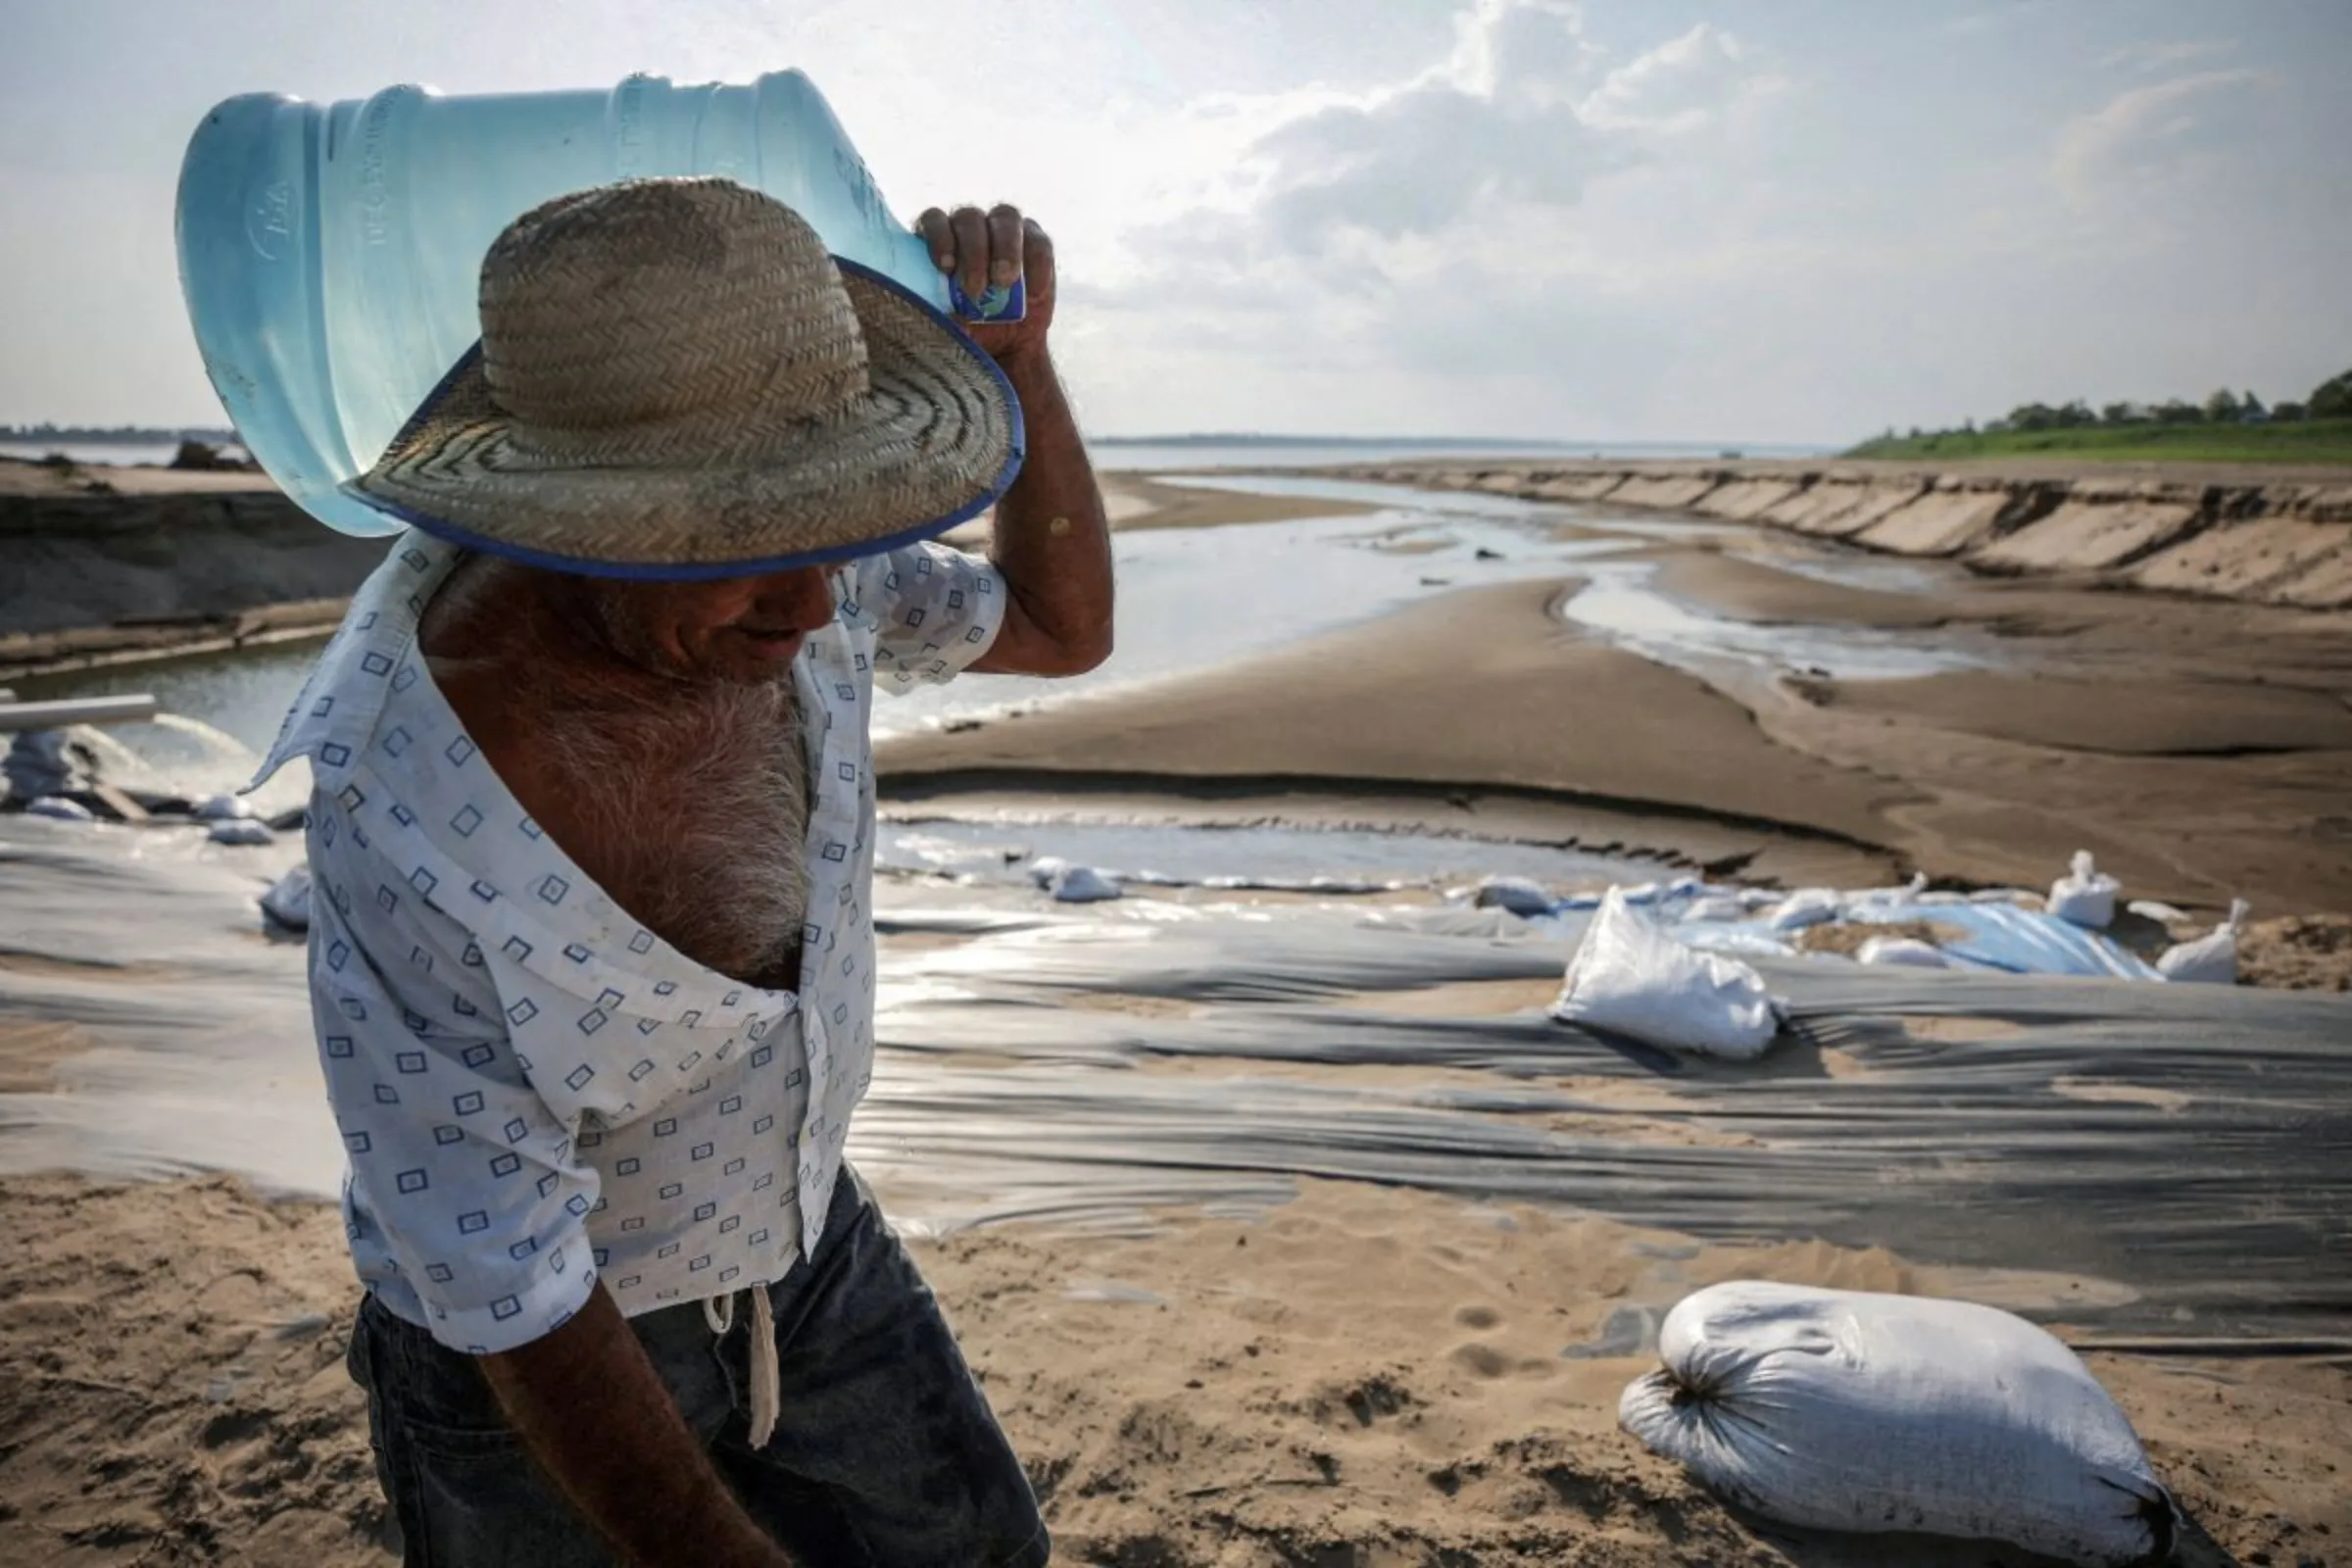 A man carries a water jug during a historic drought in the Amazon at the dry riverbed of the Paraua river in Careiro da Varzea, Amazonas state, Brazil October 26, 2023